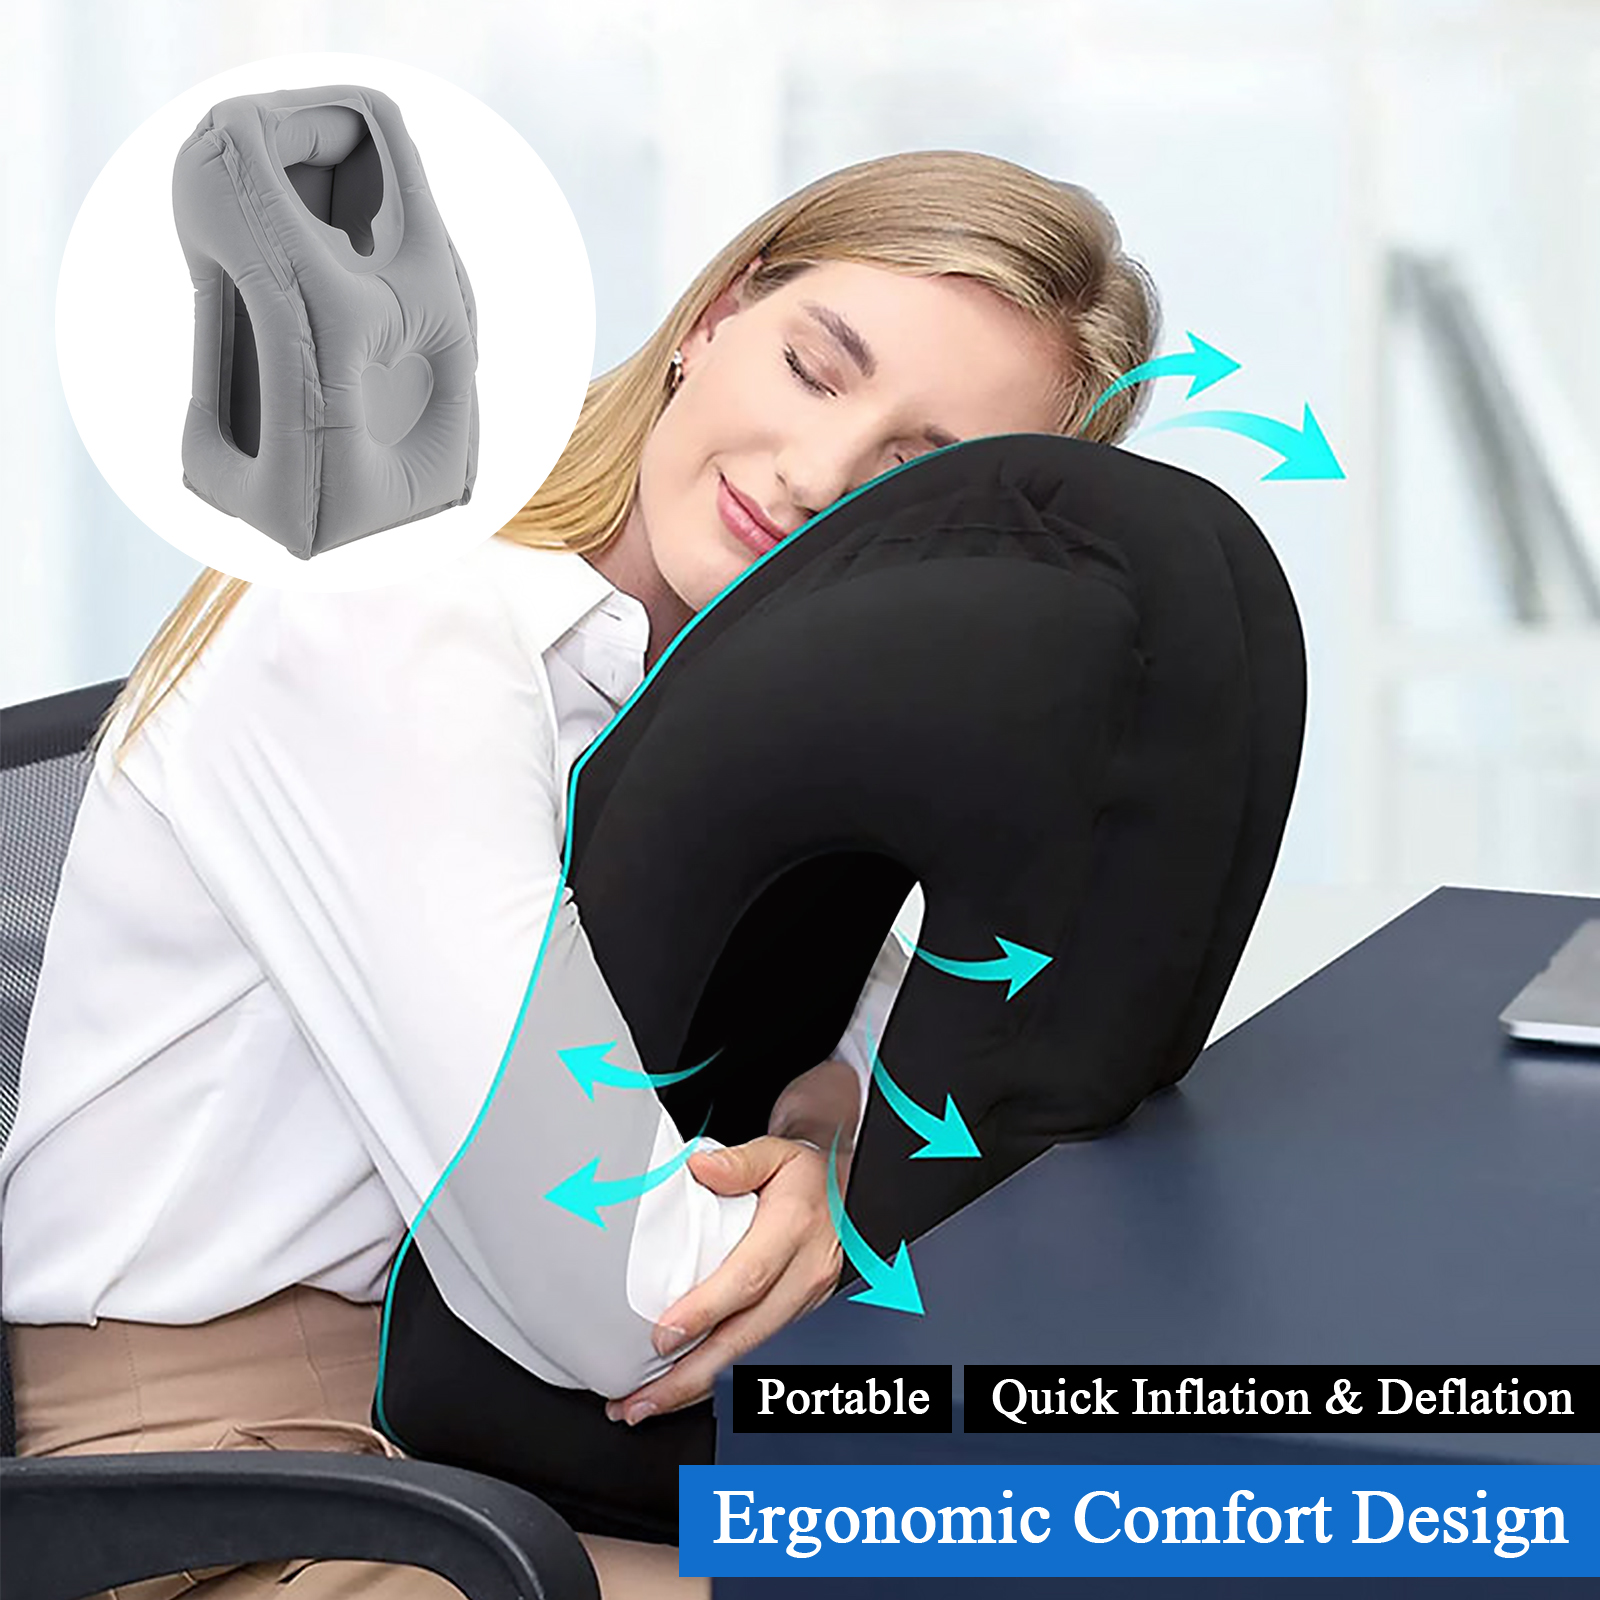 Travel Pillow Portable Inflatable Air Cushion Airplane Office Nap Neck Head Rest Black/Grey